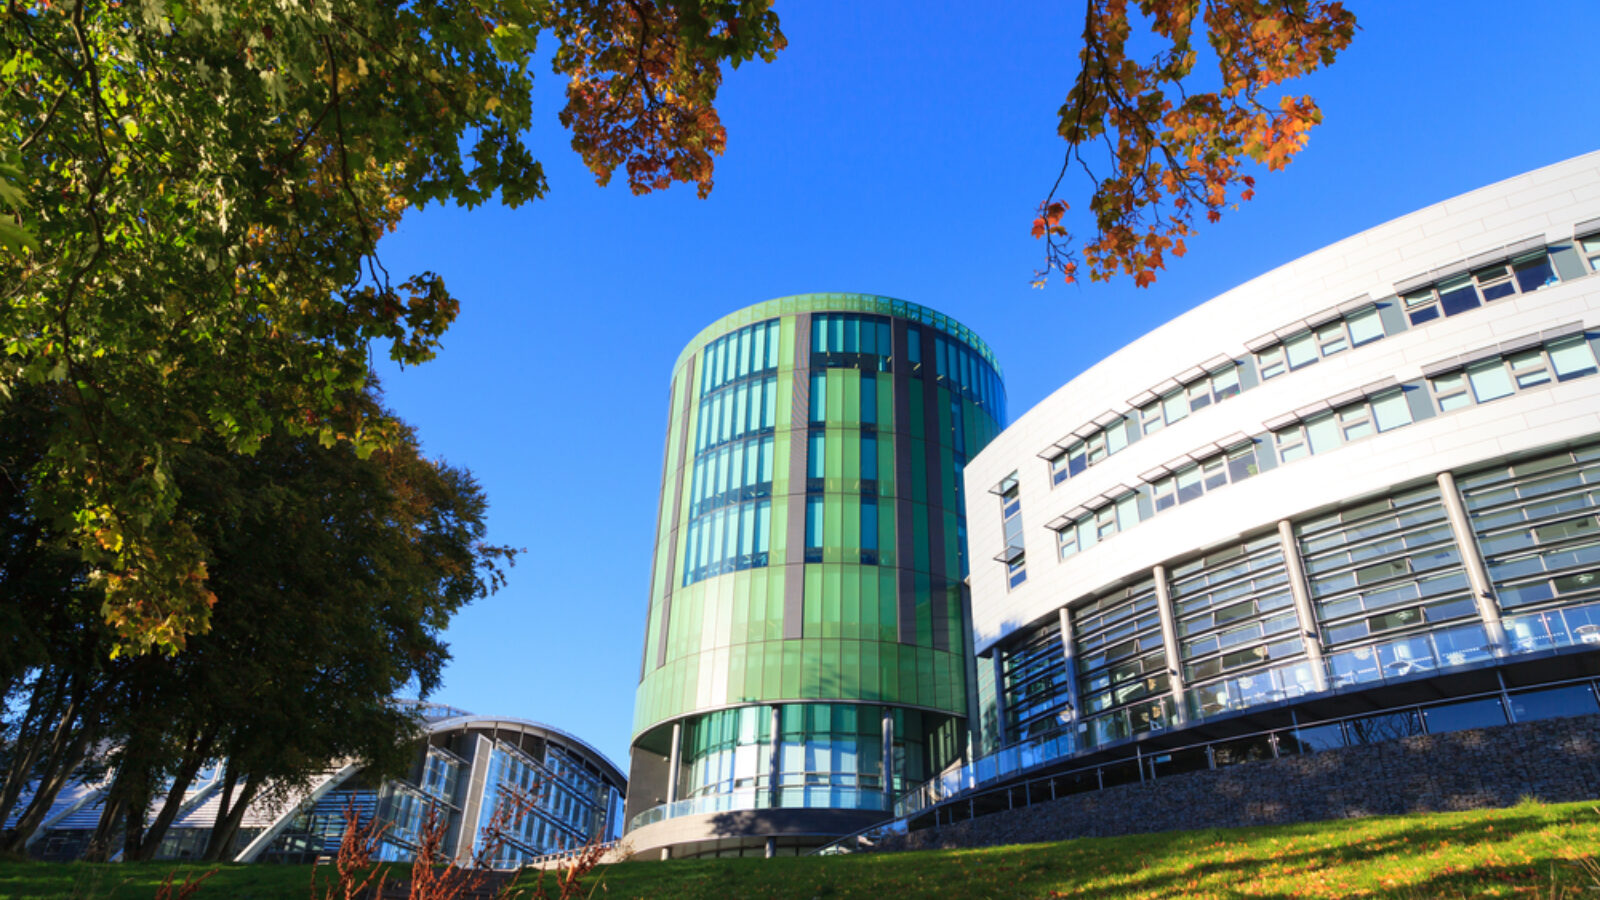 'Perfect storm' facing universities forces RGU to restructure and cut jobs